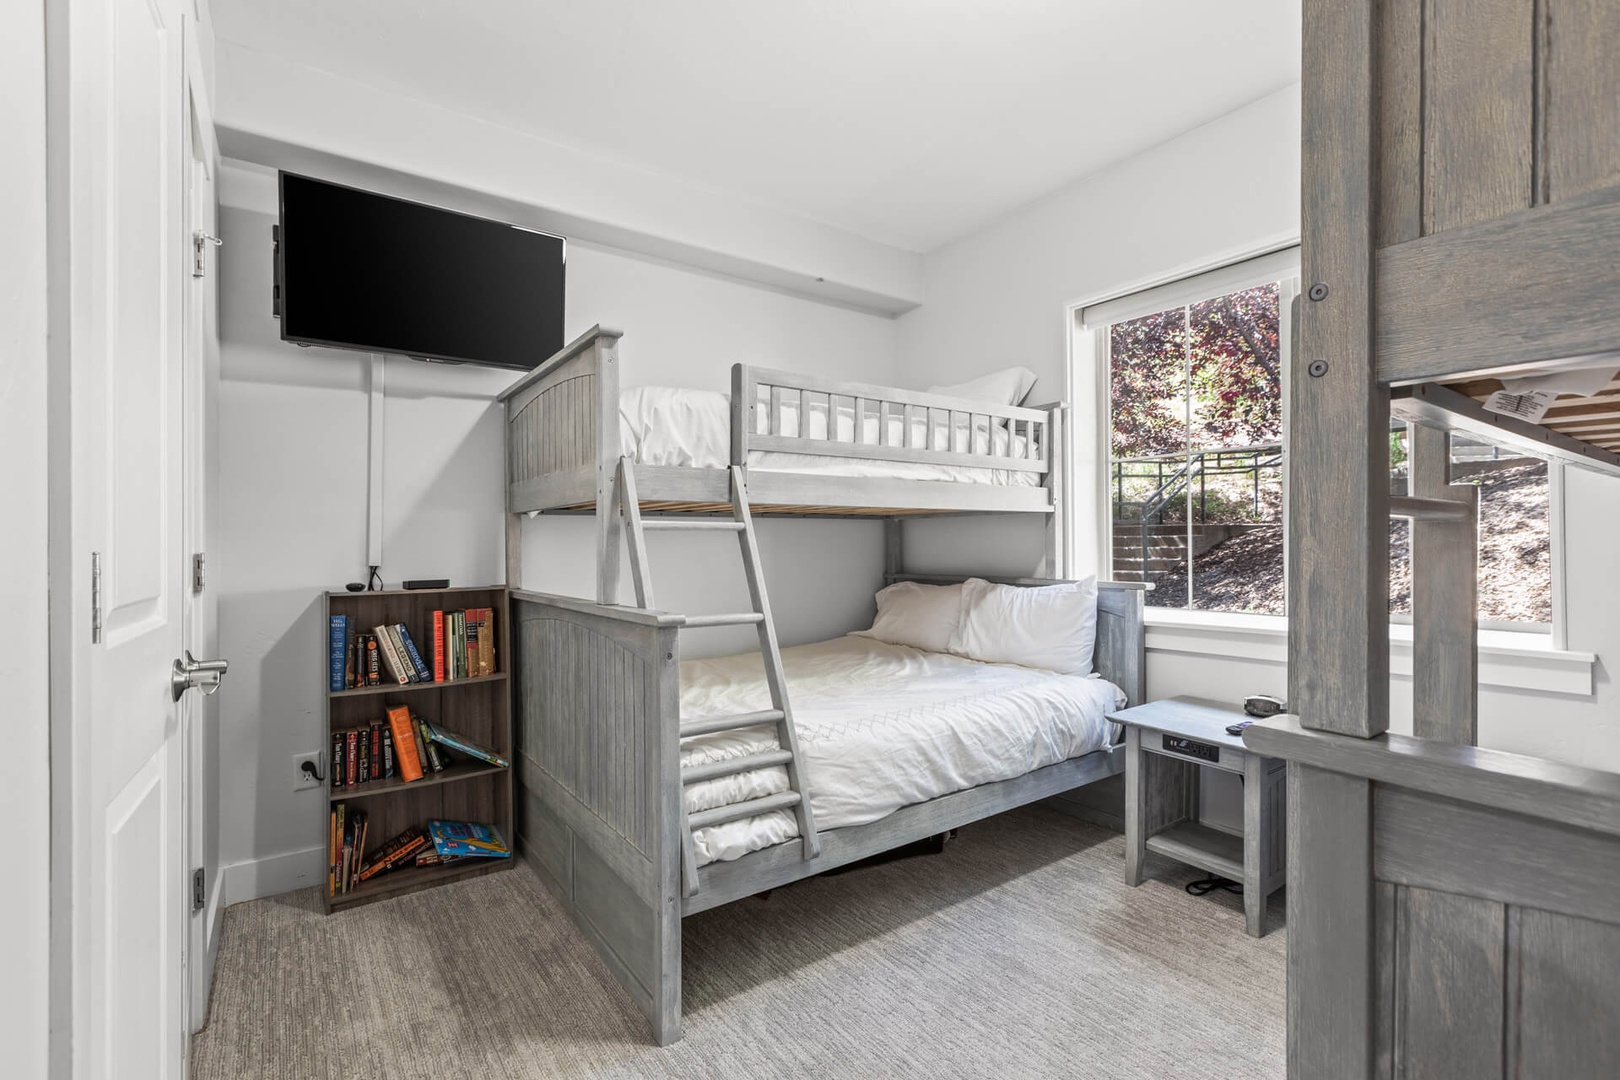 Bear Hollow Lodges 4203: THIRD BEDROOM is a bunk room with a twin-over-full-size bunk as well as a twin-over-twin-size bunk— so there’s sleeping space for five.